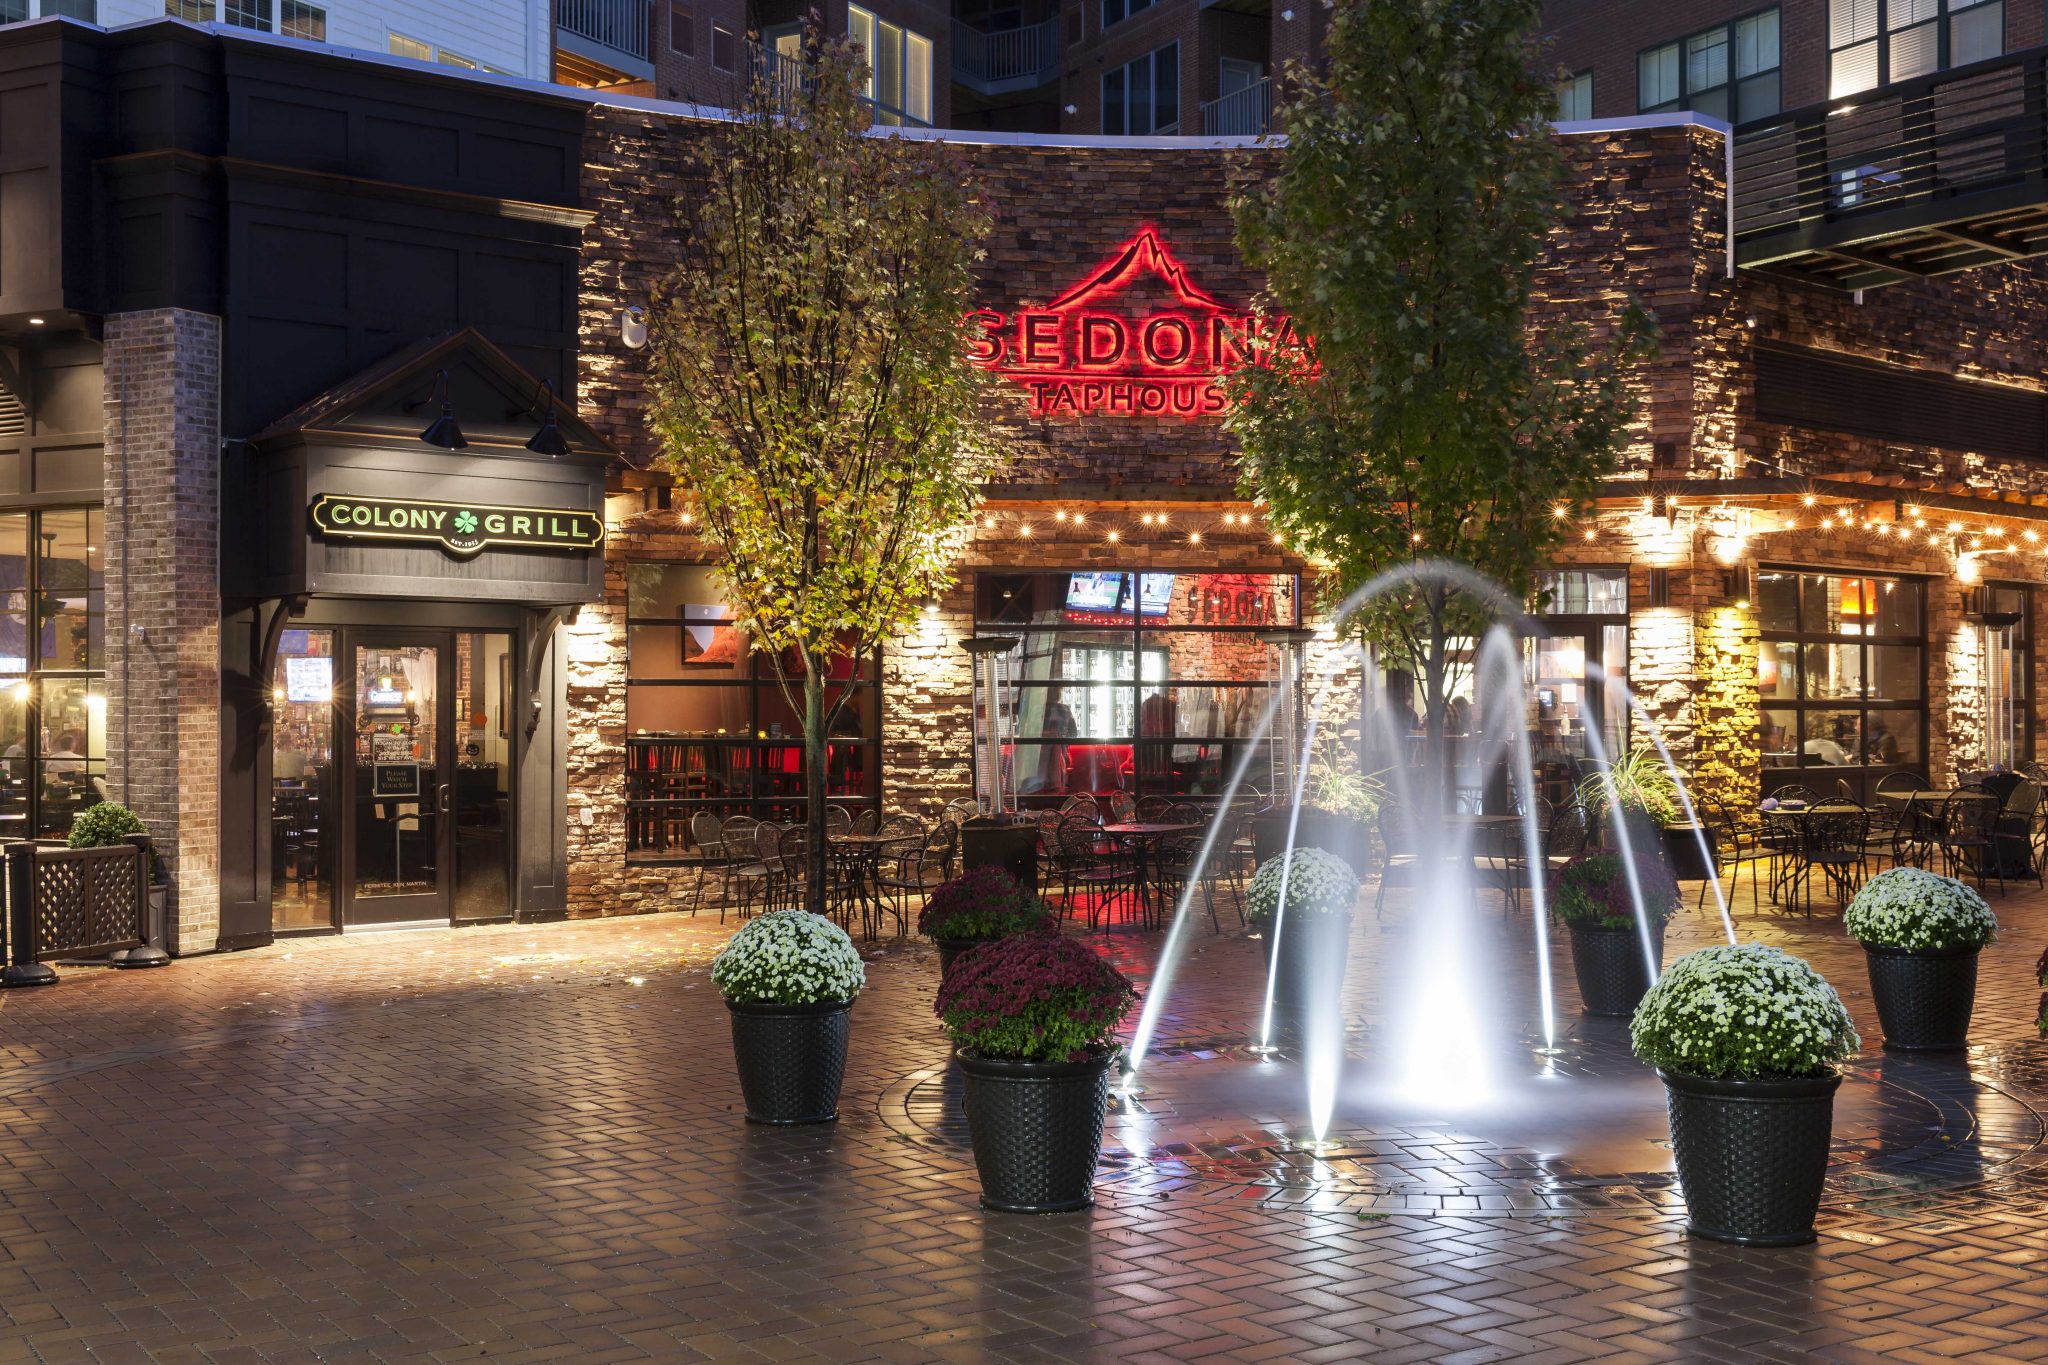 Exterior of restaurant with lit fountain in foreground